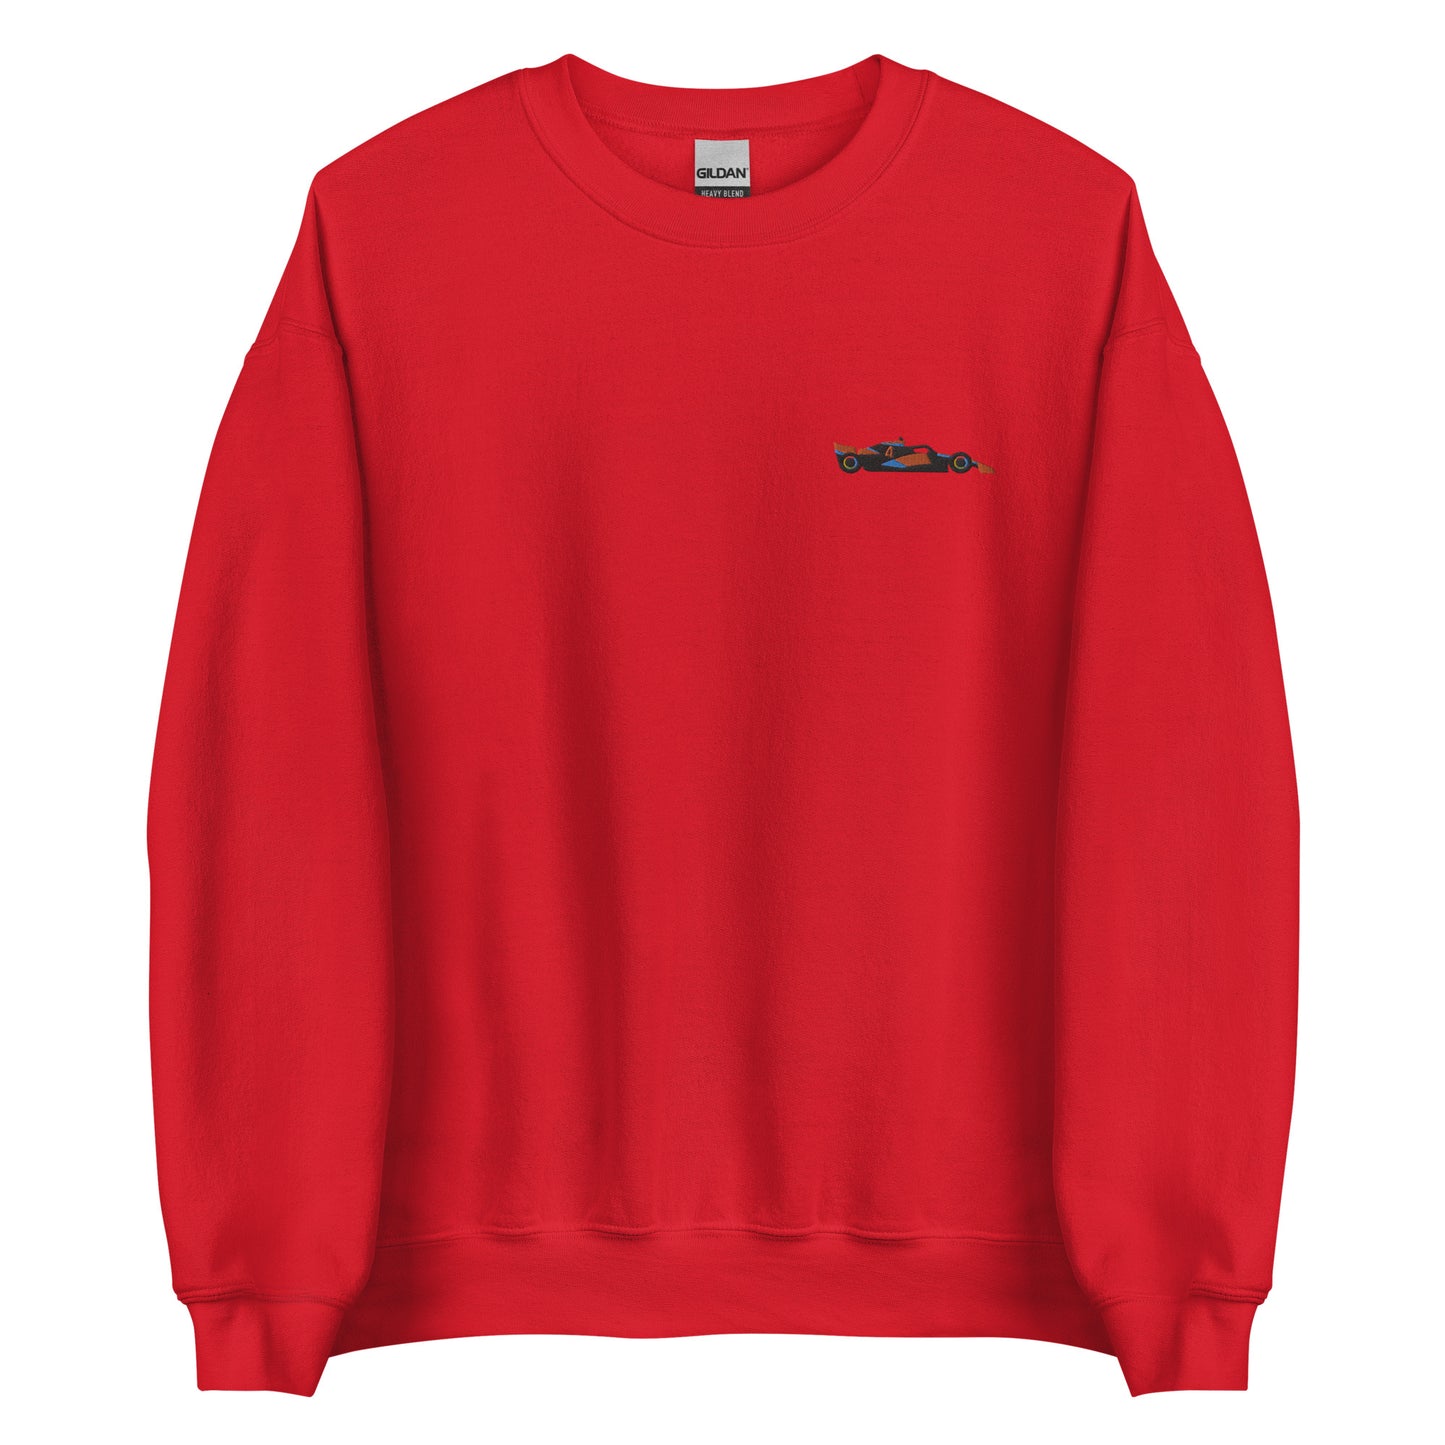 Embroidered mclaren f1 car sweater red